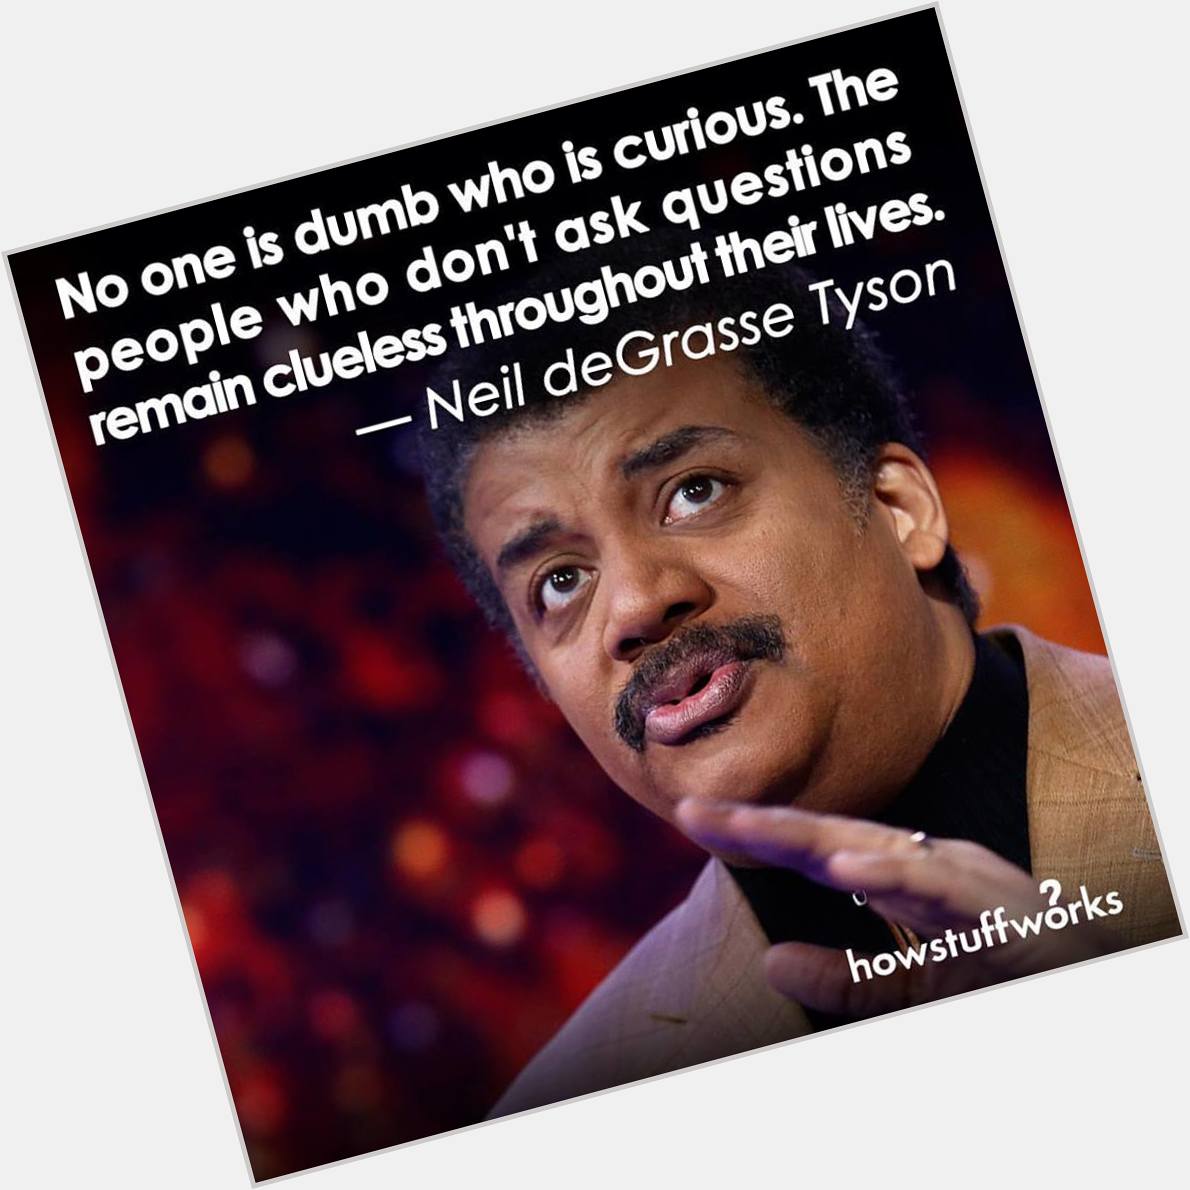 Howstuffworks
Happy birthday, Neil deGrasse Tyson! (born October 5, 1958) 
Read More:  